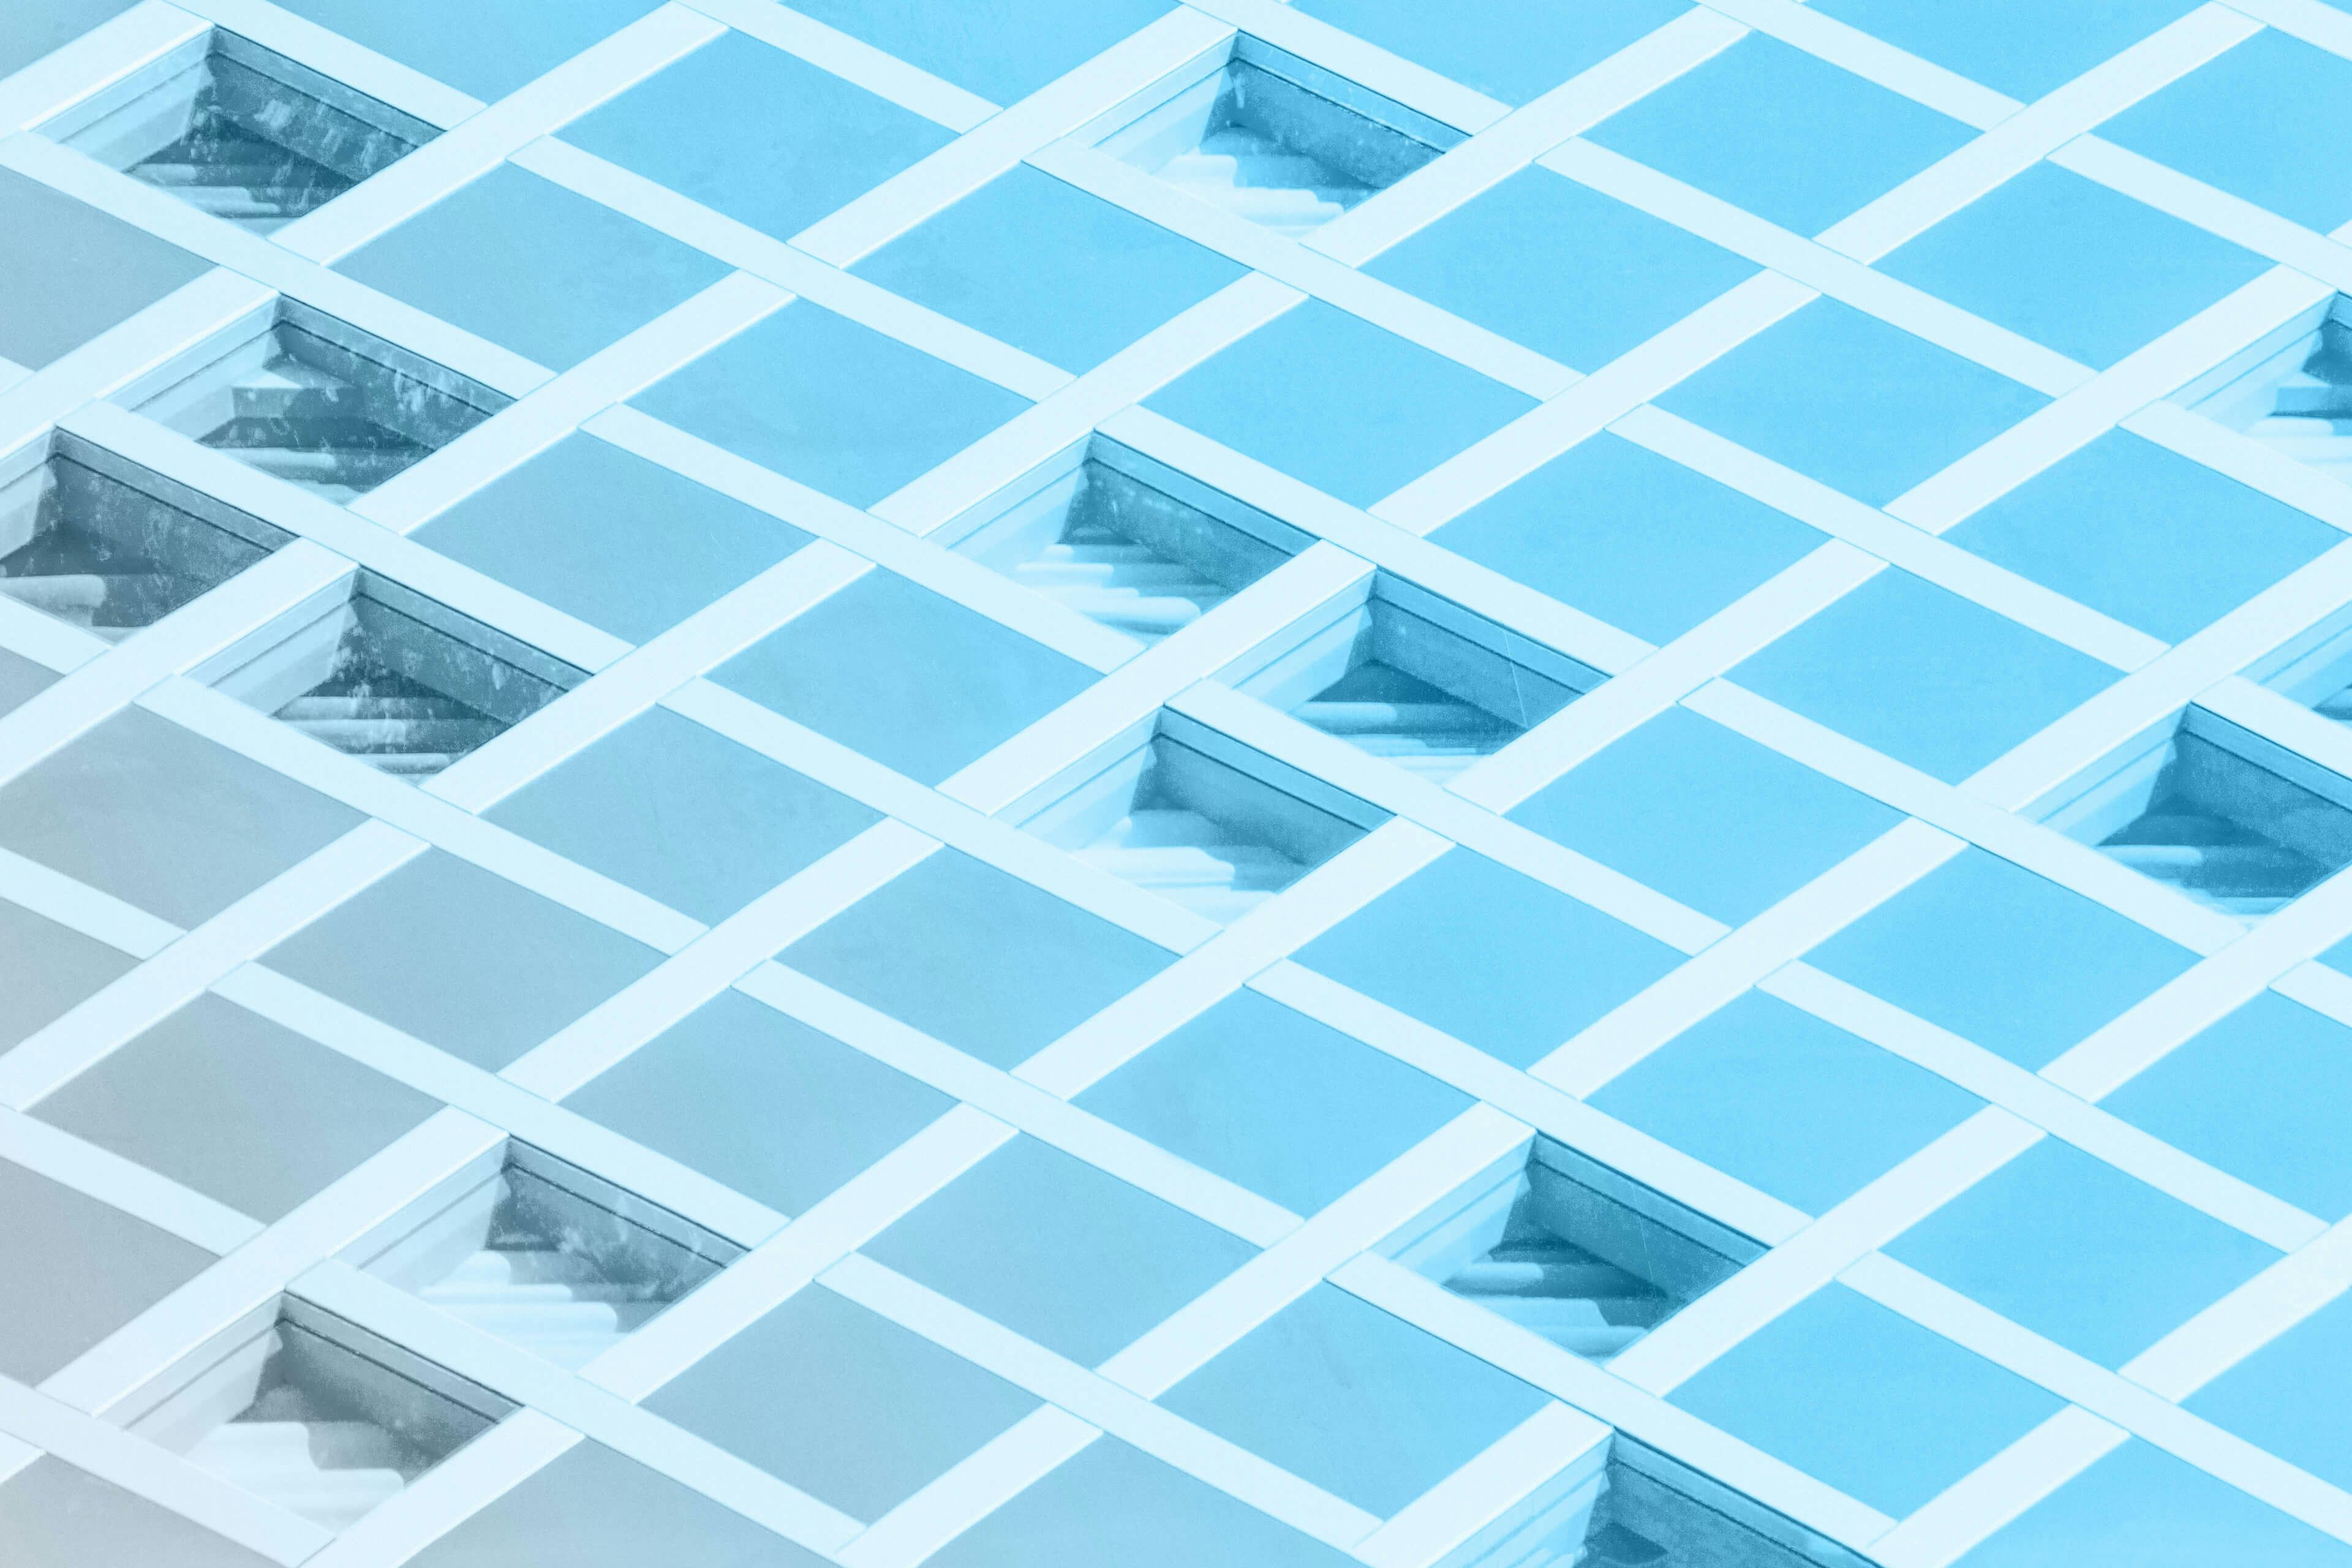 3-d rendering of a flat, checkerboard surface with random indents in select squares.